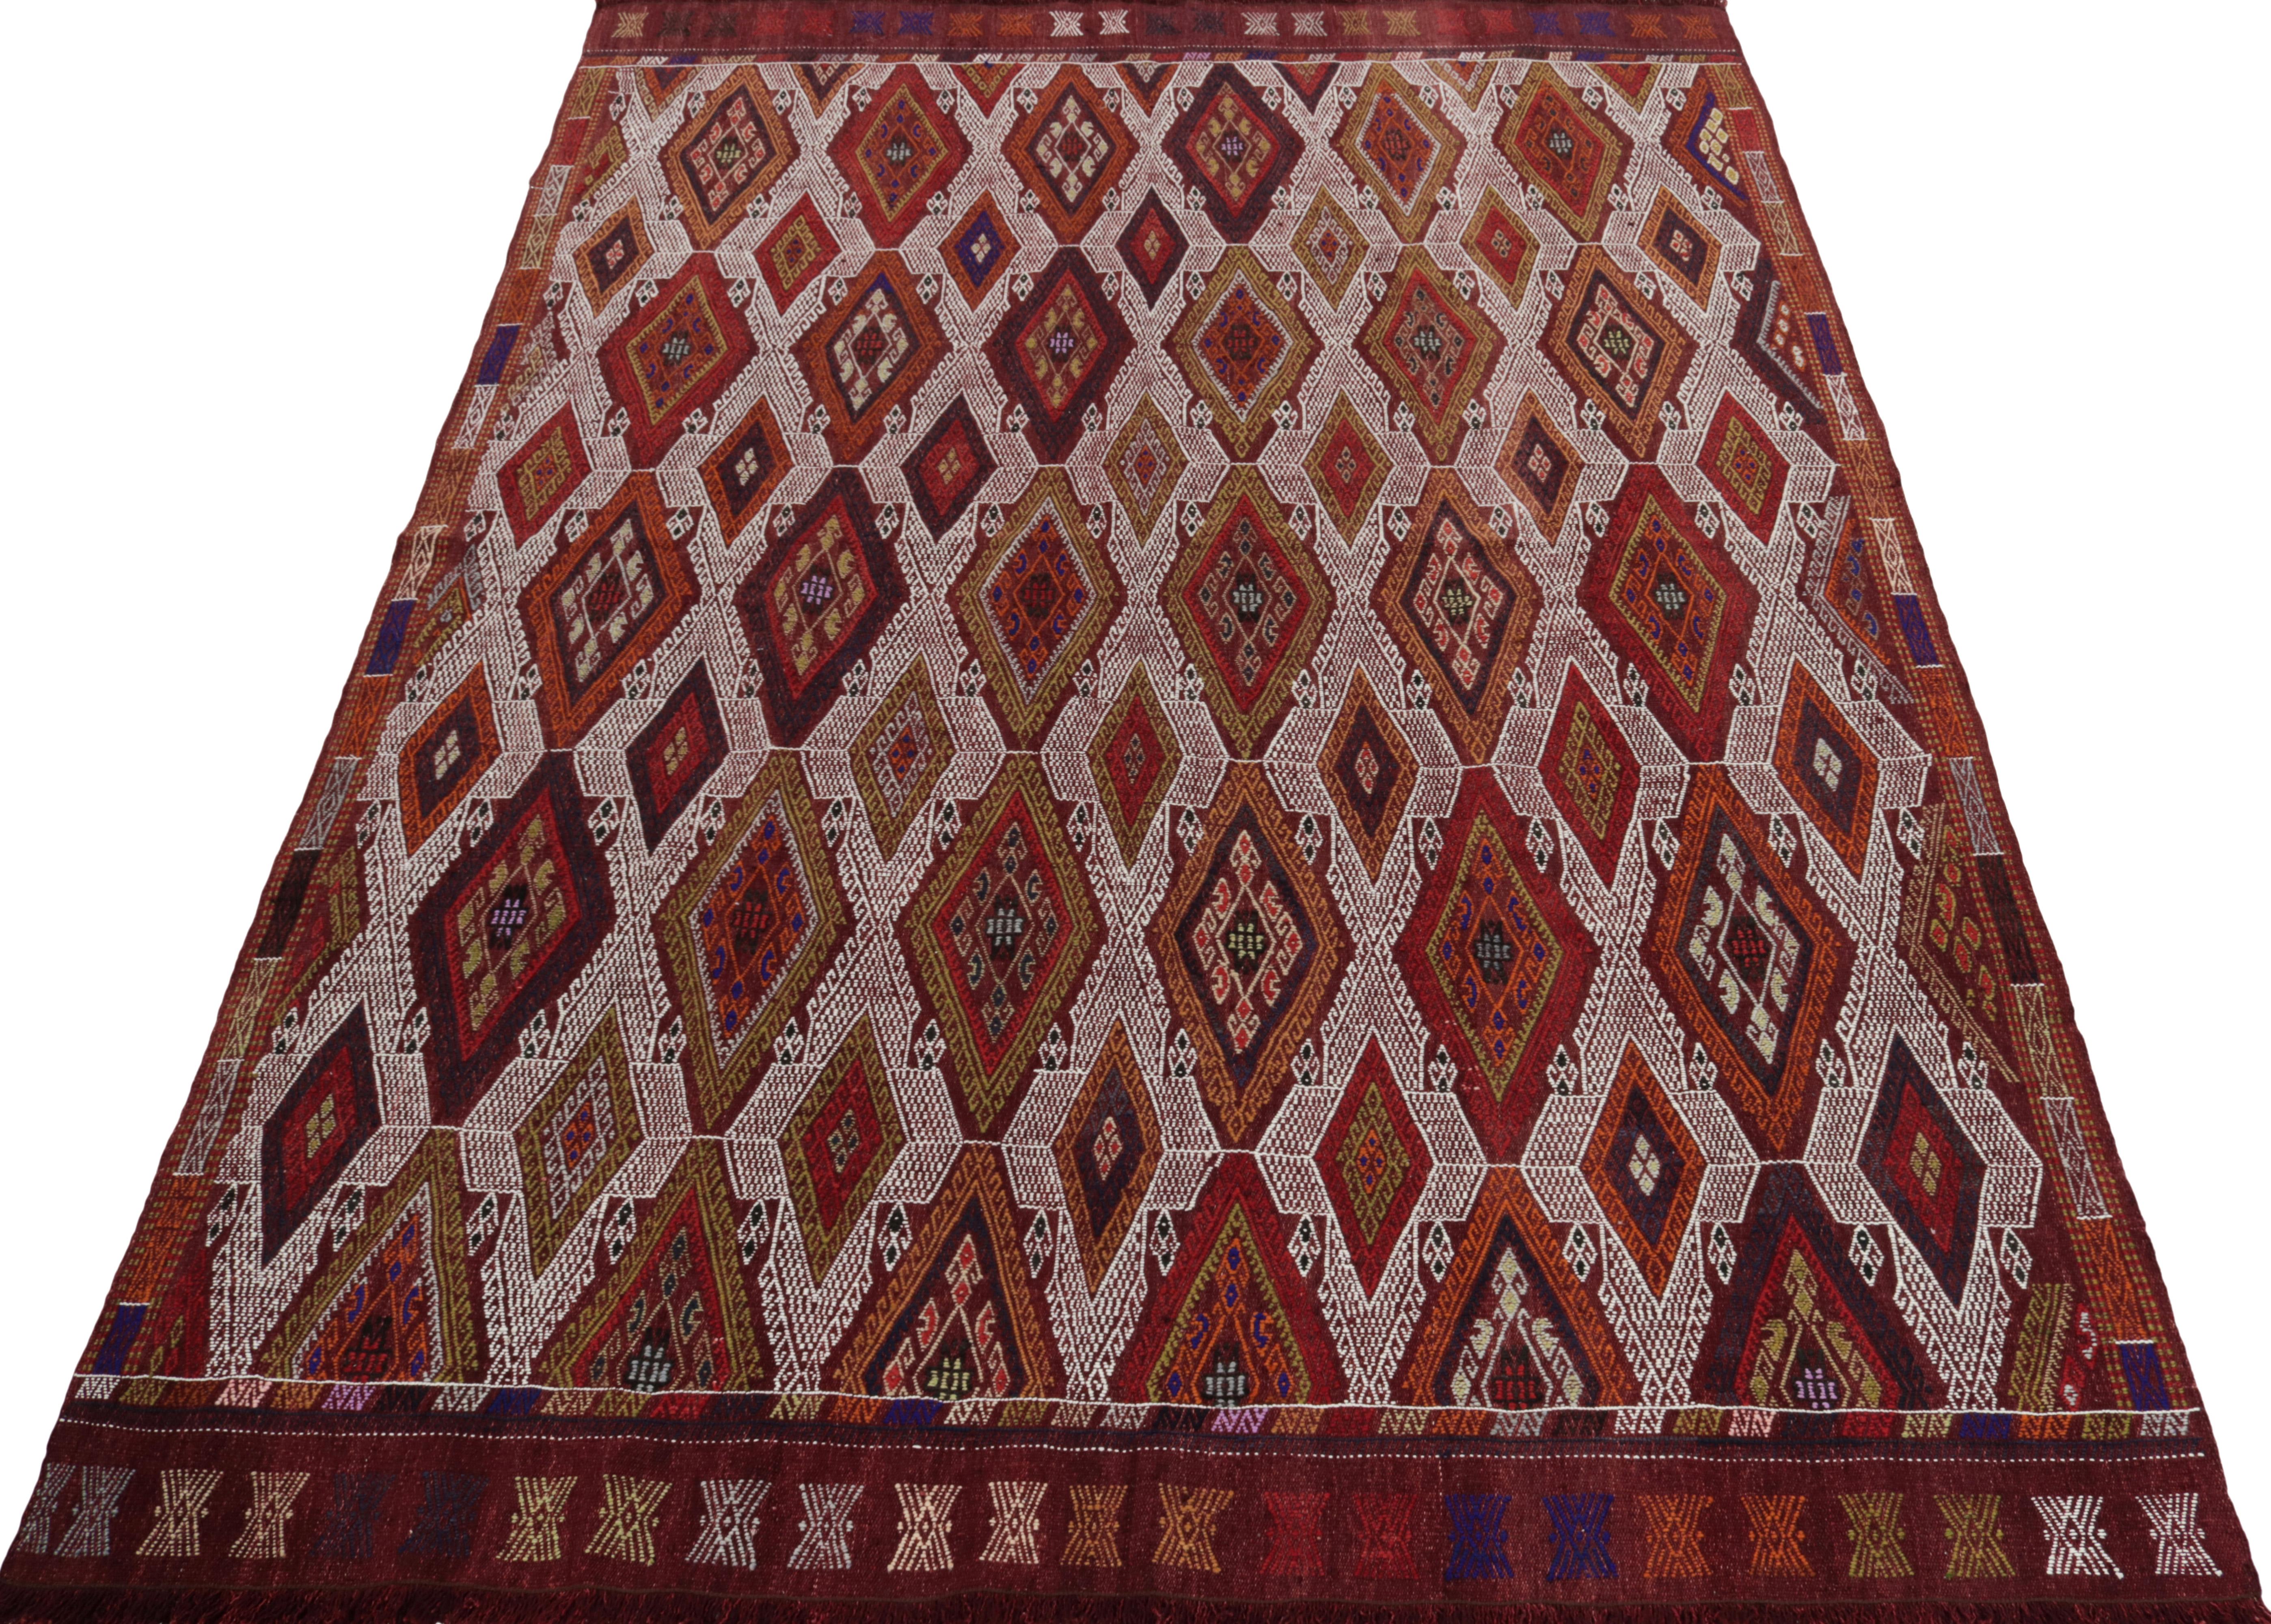 Handwoven in fine quality wool, a 5x7 kilim rug from Turkey circa 1950-1960 joining our Kilim & Flatweave collection. 

The vintage flat weave enjoys fine embroidery height in a burgundy & white colorway with beautiful accenting colors, bringing a